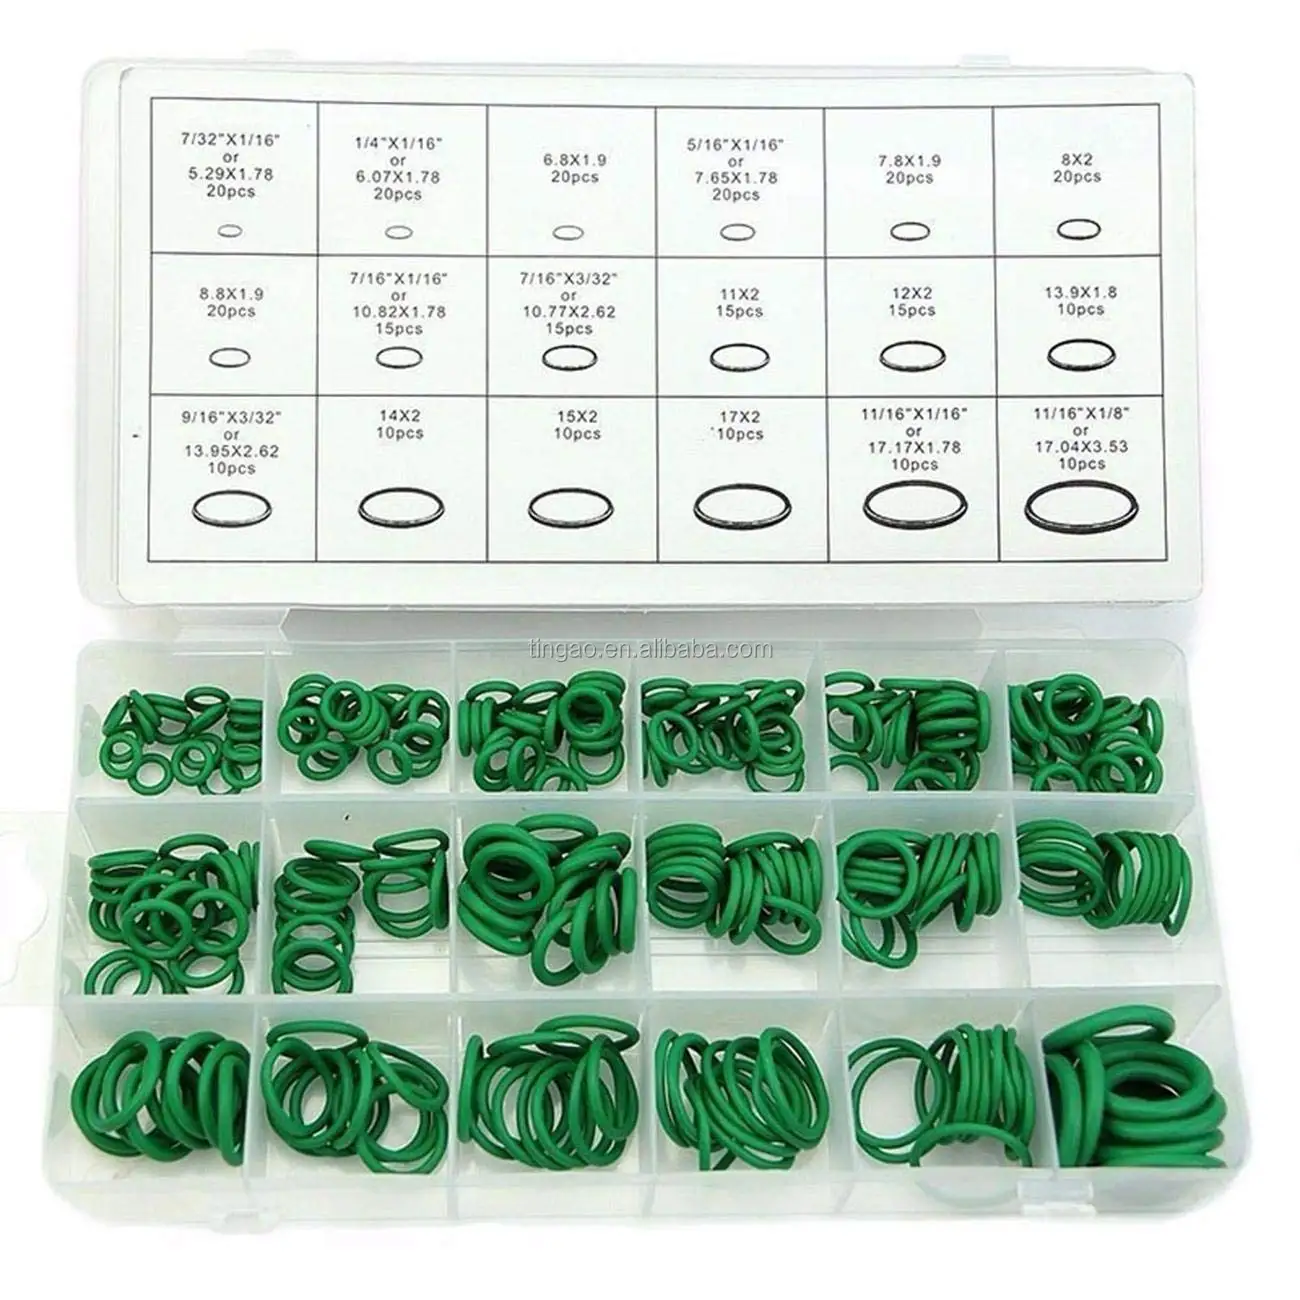 270pcs 18 Sizes ORING O-Ring Replacement Kit Car Truck Air Conditioning O-Ring Assortment Green O-Ring Rubber Seals Tool Kit 